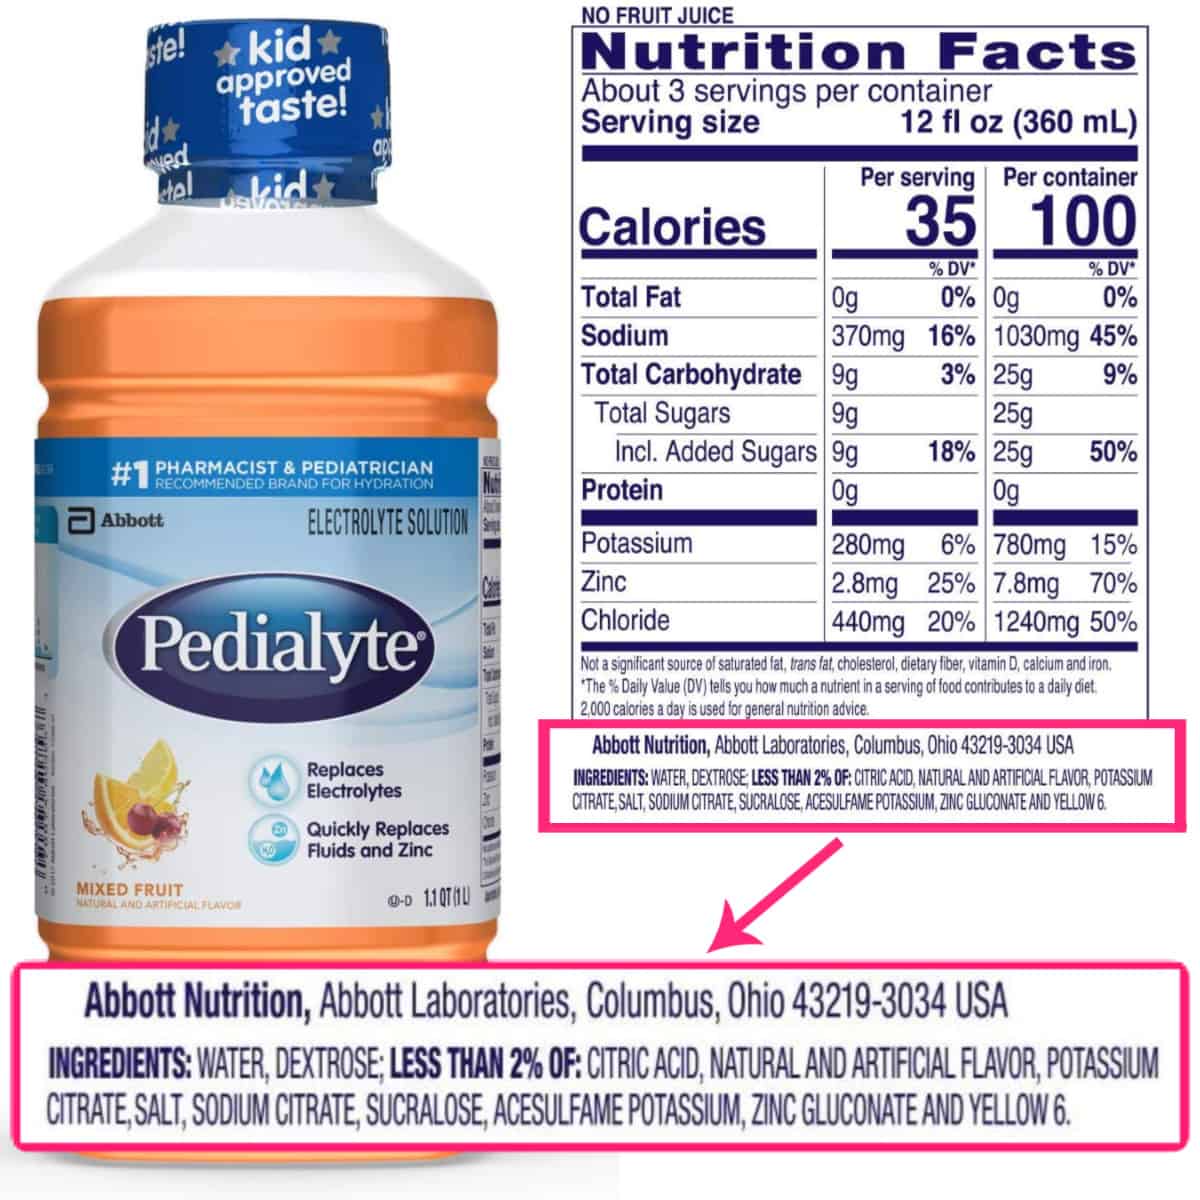 Orange pedialyte ingredients and nutritional information and bottle